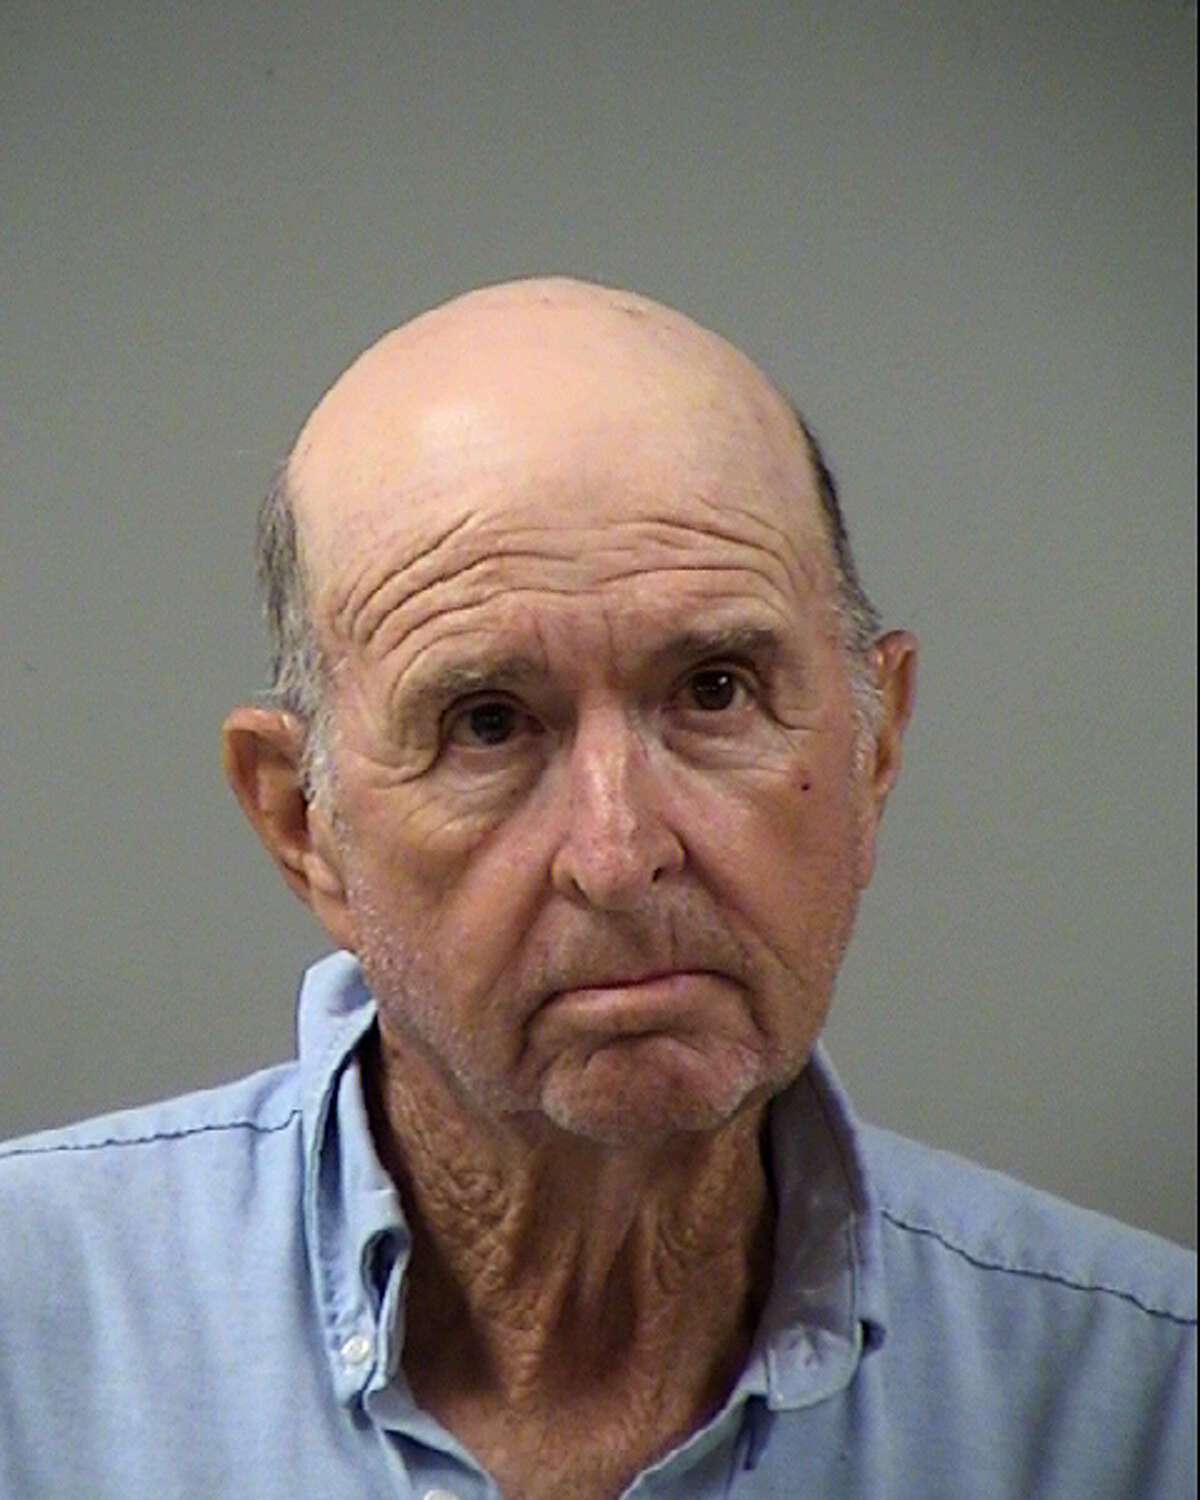 Police arrested Dennis Ray Higgins, a 67-year-old carpenter for the city's Parks and Recreation Department, around 3:50 p.m. Thursday after allegedly soliciting oral sex from an officer for the San Antonio Park Police Covert Operations Unit, according to a police report.